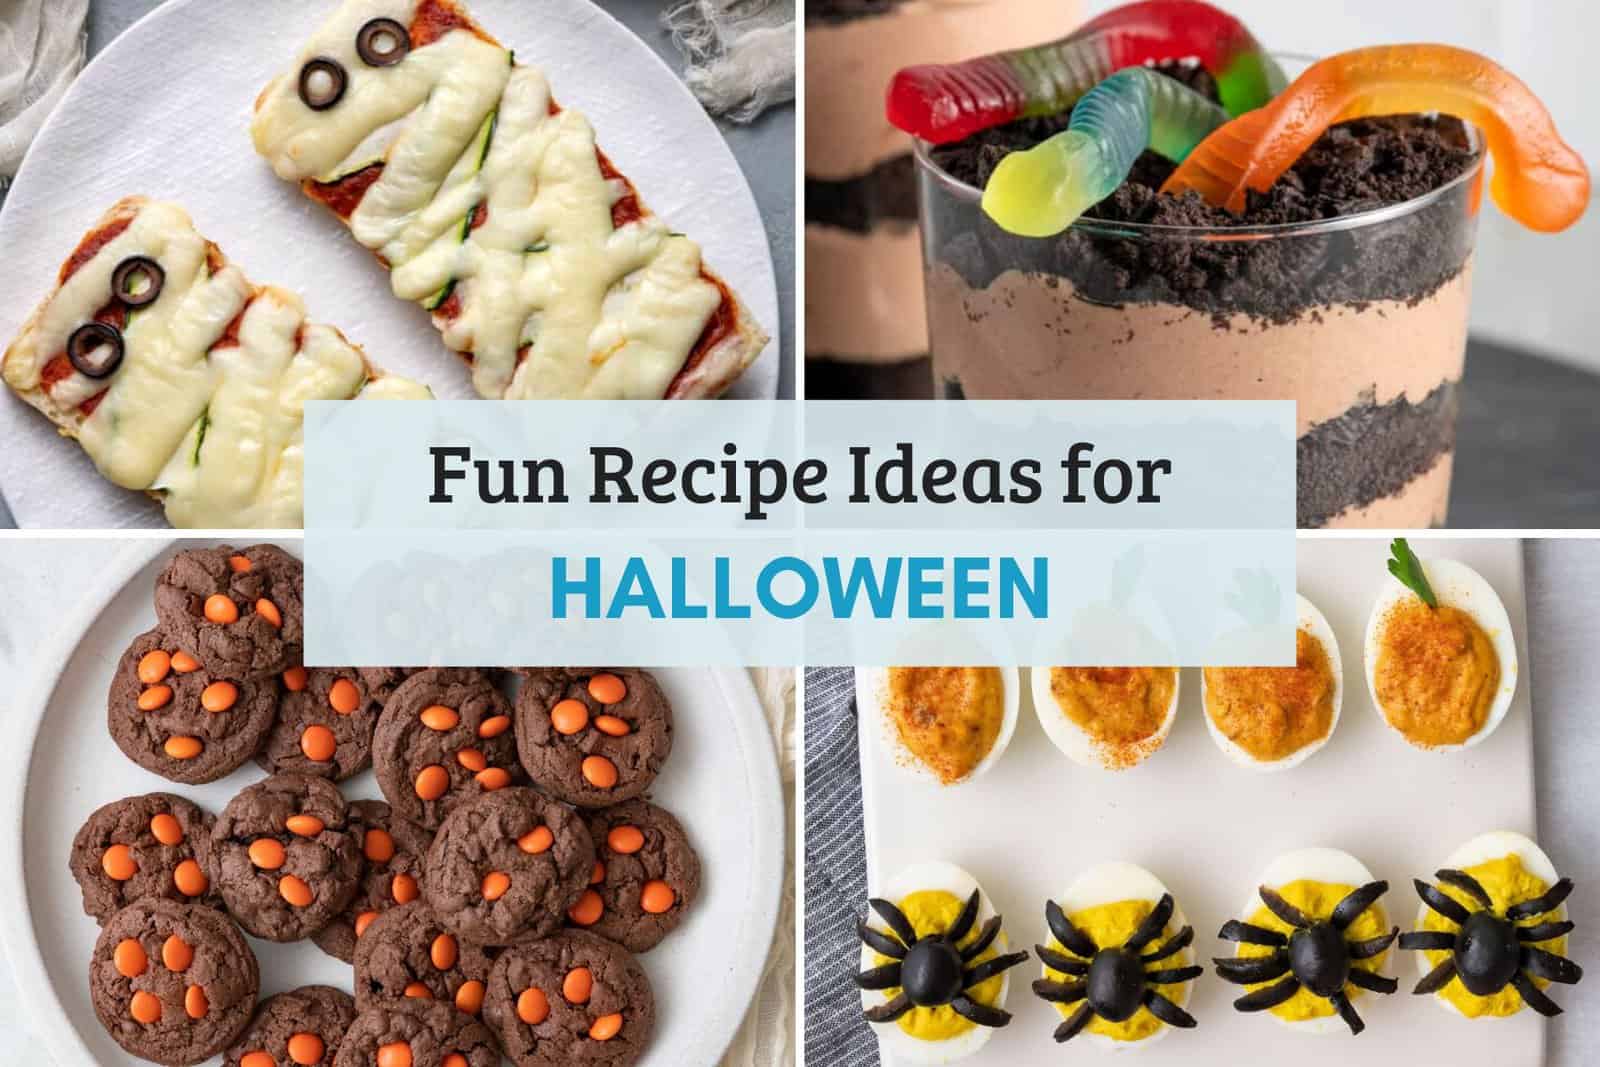 Halloween recipes roundup featured image